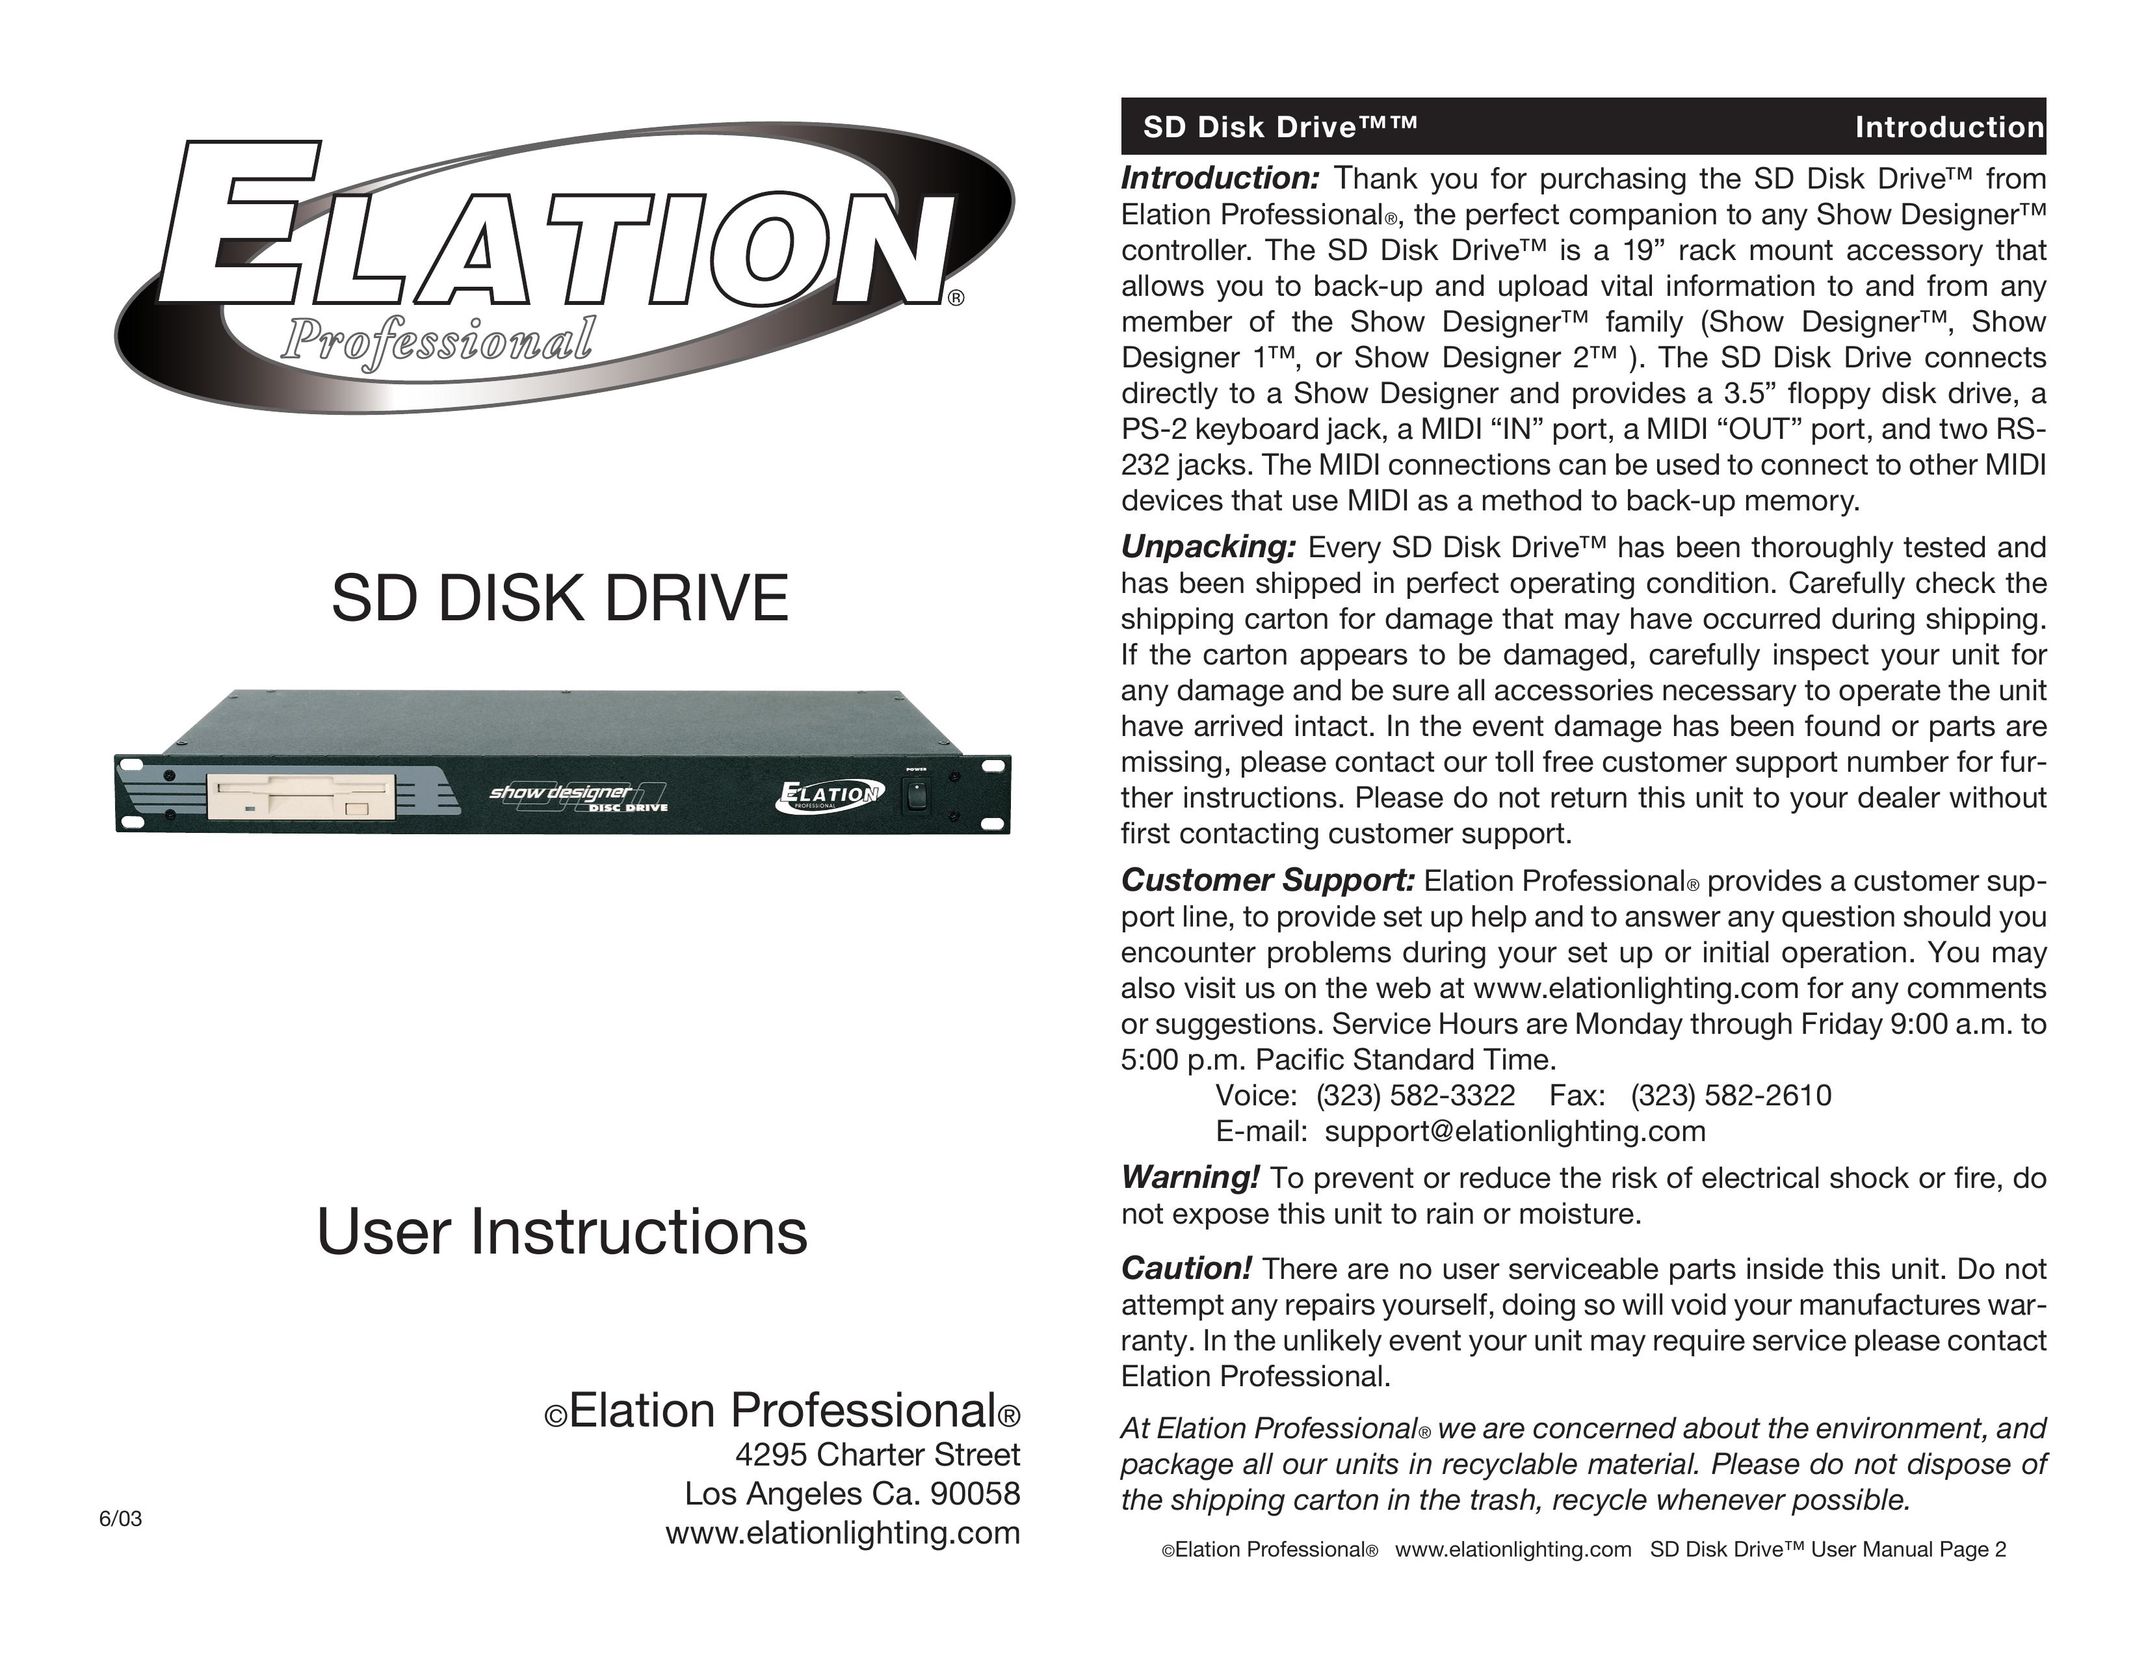 Elation Professional SD Network Card User Manual